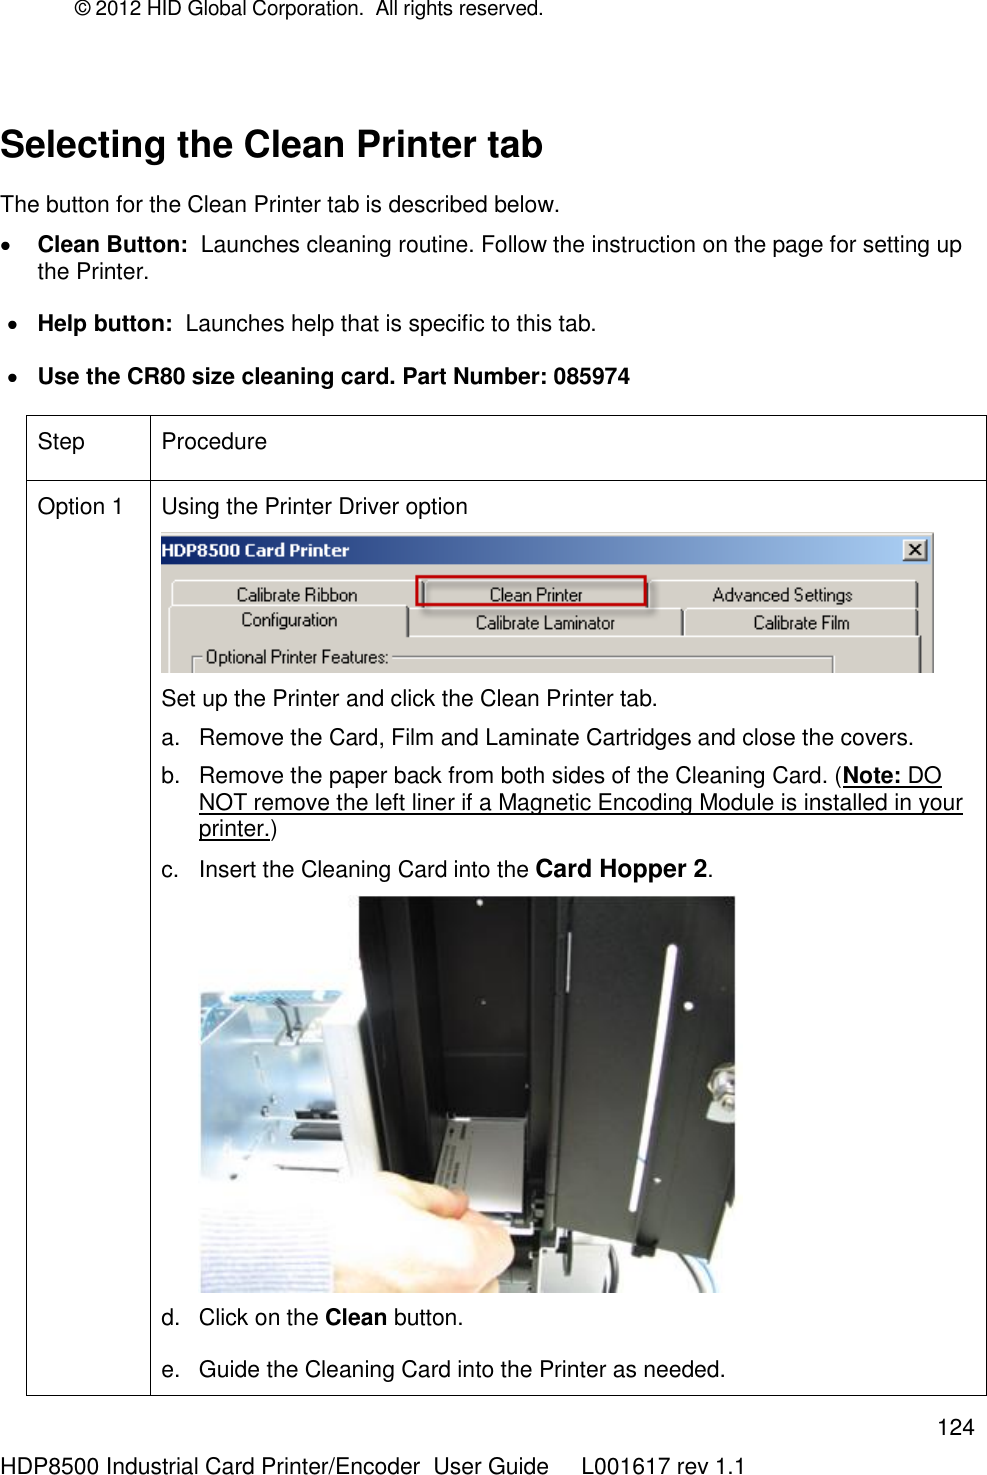 © 2012 HID Global Corporation.  All rights reserved.  124 HDP8500 Industrial Card Printer/Encoder  User Guide     L001617 rev 1.1  Selecting the Clean Printer tab   The button for the Clean Printer tab is described below.  Clean Button:  Launches cleaning routine. Follow the instruction on the page for setting up the Printer.  Help button:  Launches help that is specific to this tab.  Use the CR80 size cleaning card. Part Number: 085974 Step Procedure Option 1 Using the Printer Driver option   Set up the Printer and click the Clean Printer tab.  a.  Remove the Card, Film and Laminate Cartridges and close the covers. b.  Remove the paper back from both sides of the Cleaning Card. (Note: DO NOT remove the left liner if a Magnetic Encoding Module is installed in your printer.) c.  Insert the Cleaning Card into the Card Hopper 2.  d.  Click on the Clean button. e.  Guide the Cleaning Card into the Printer as needed. 